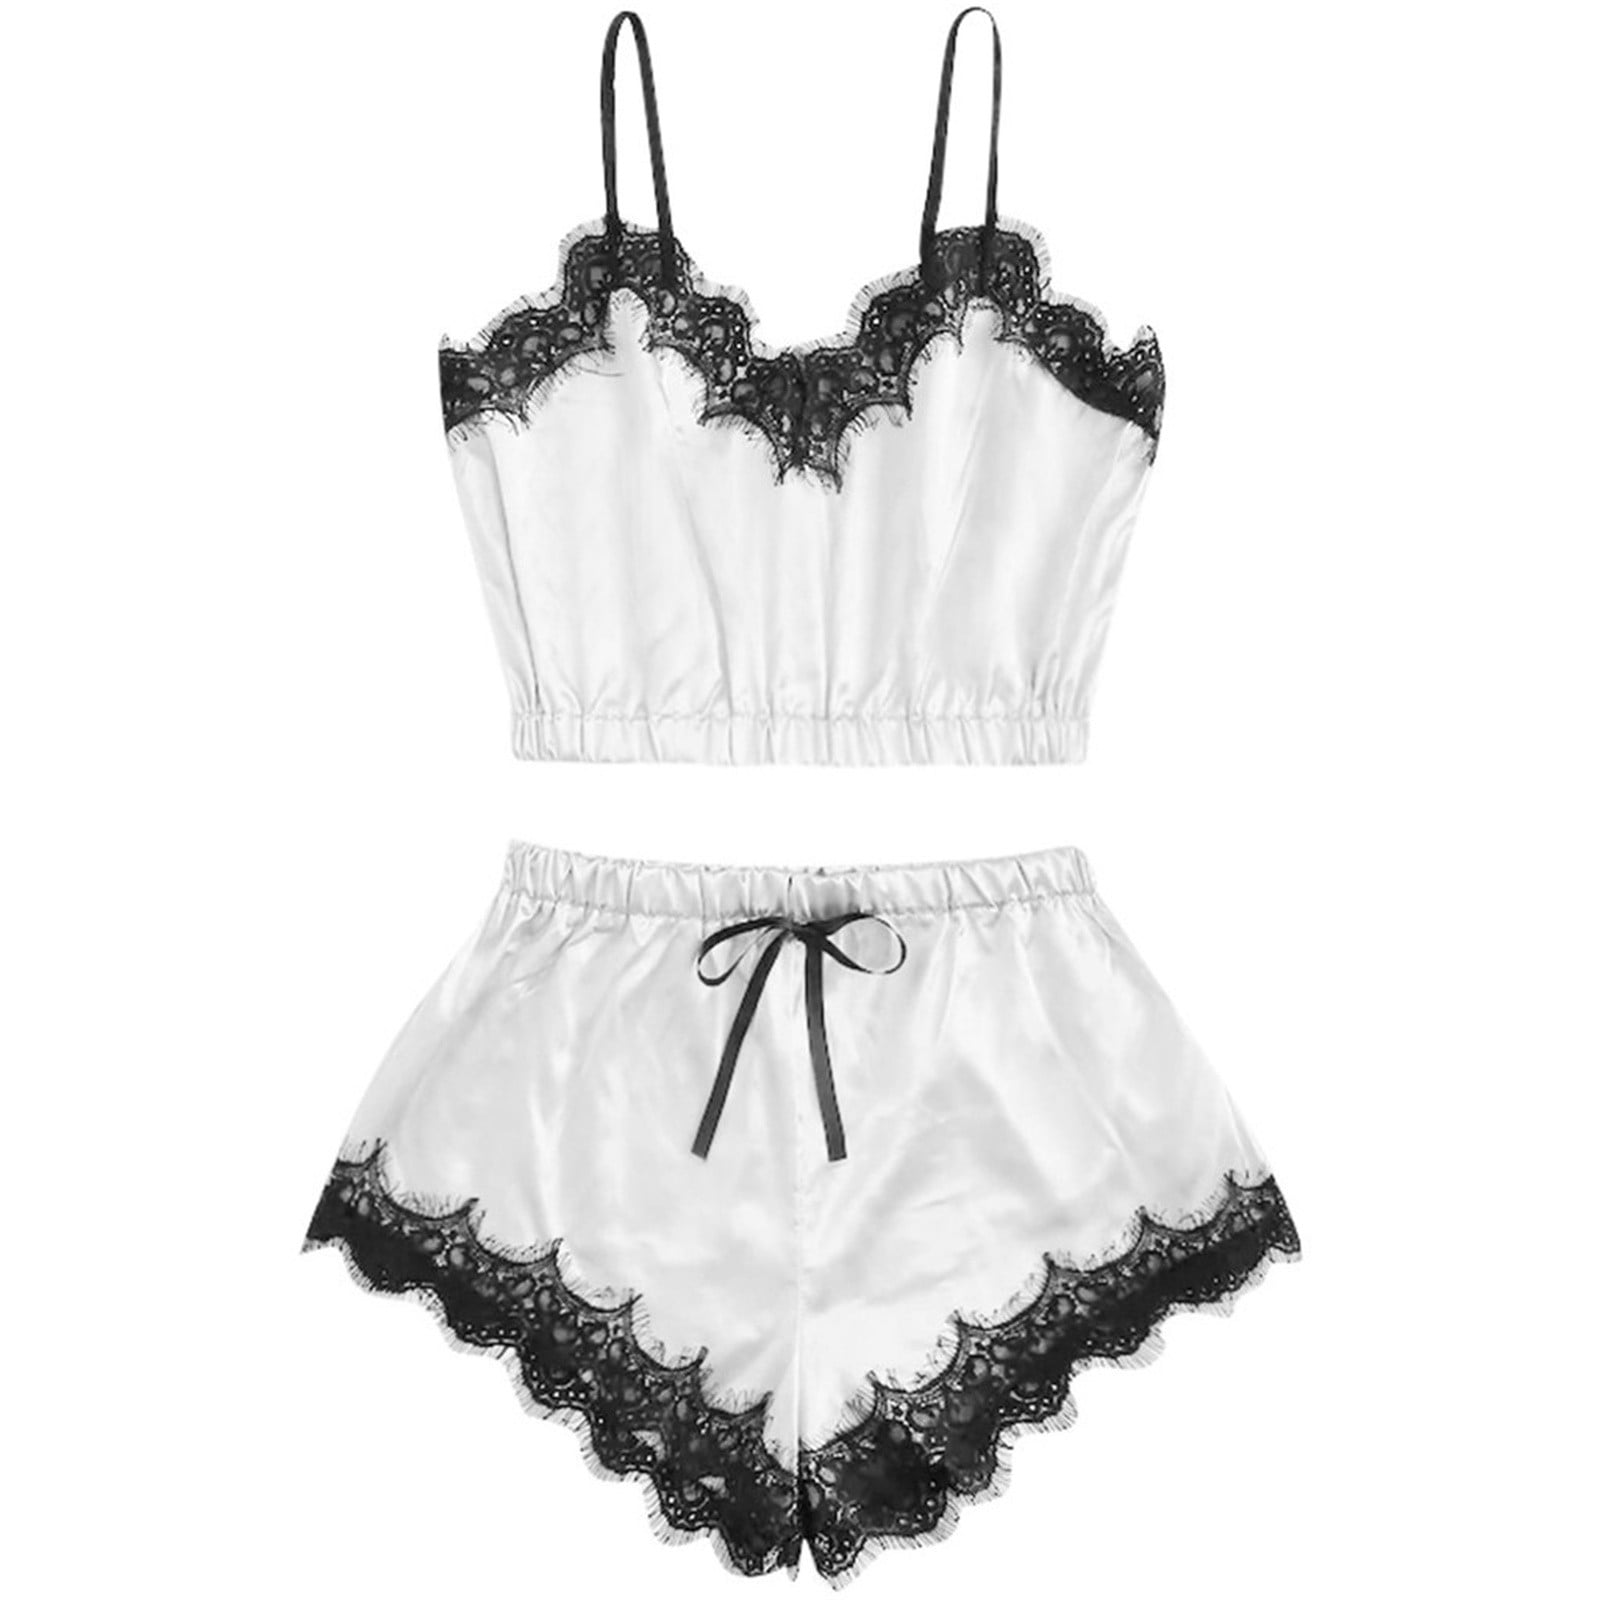 Xhjun Women Sheer Lingerie Chemise With Lace Set 2 Pieces Stain Sexy Underwear Bodysuit Teddy